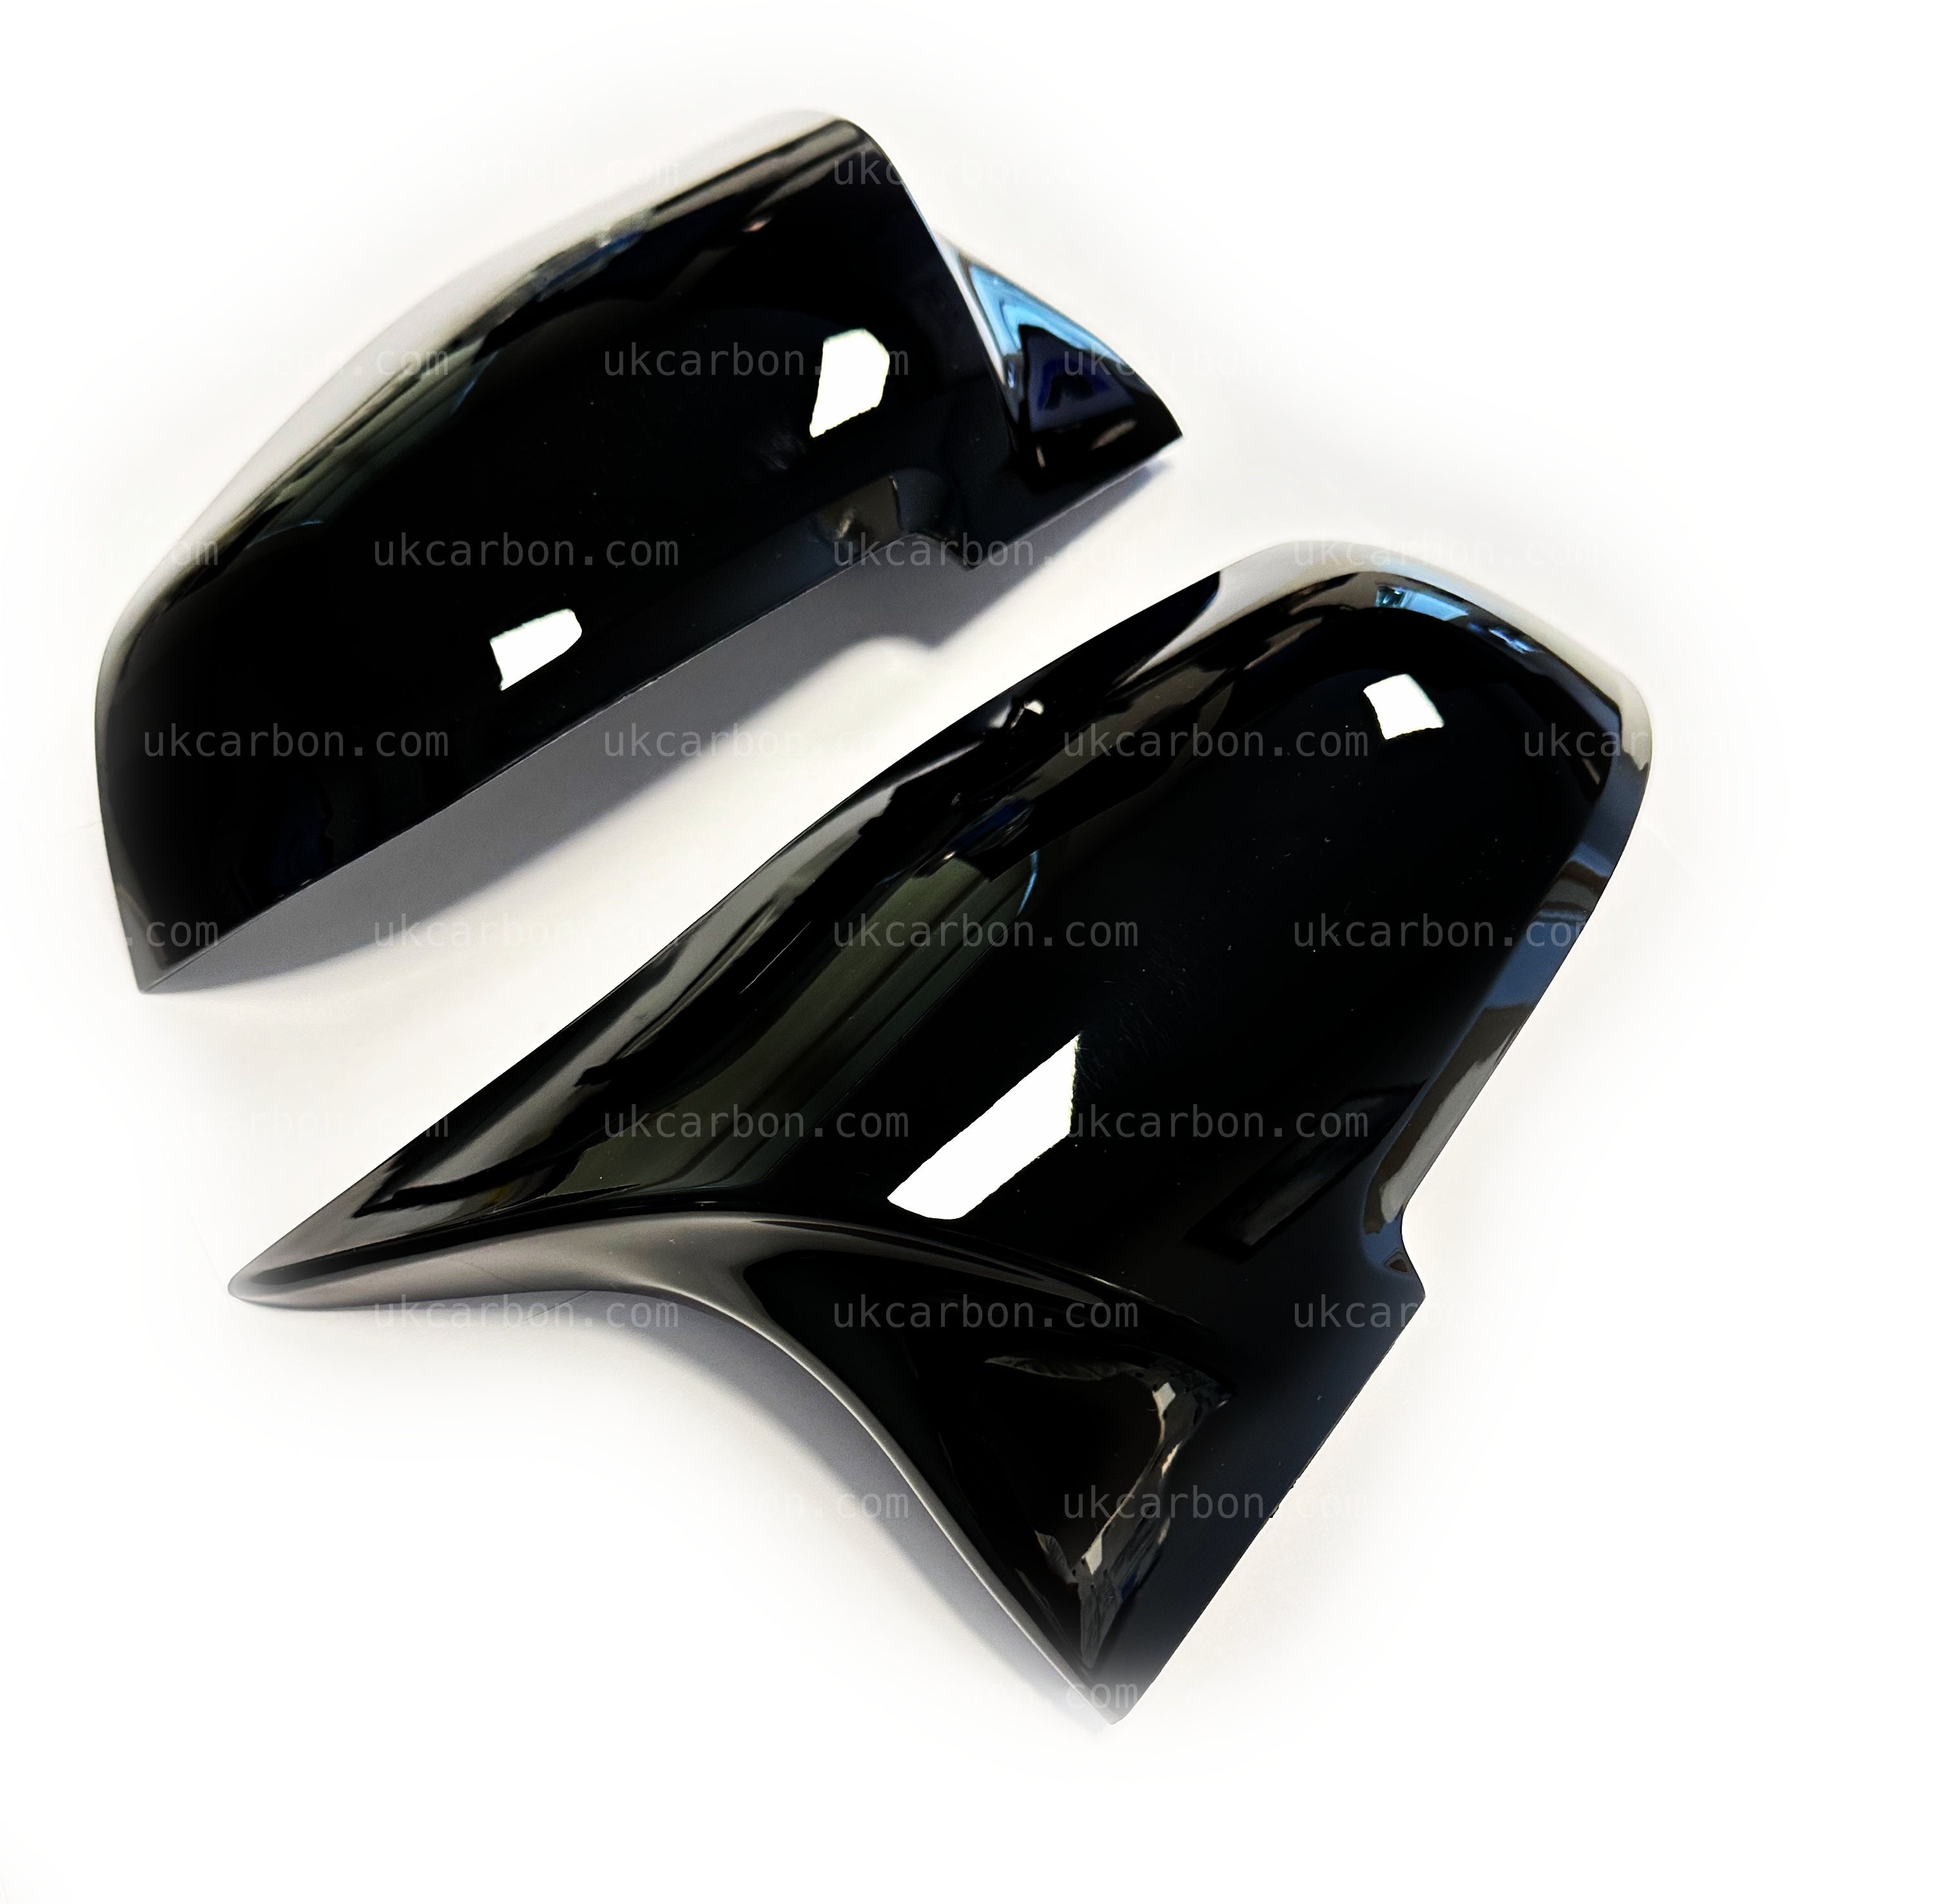 BMW 3 Series Gloss Black M Style Wing Mirror Cover Replacements F30 by UKCarbon